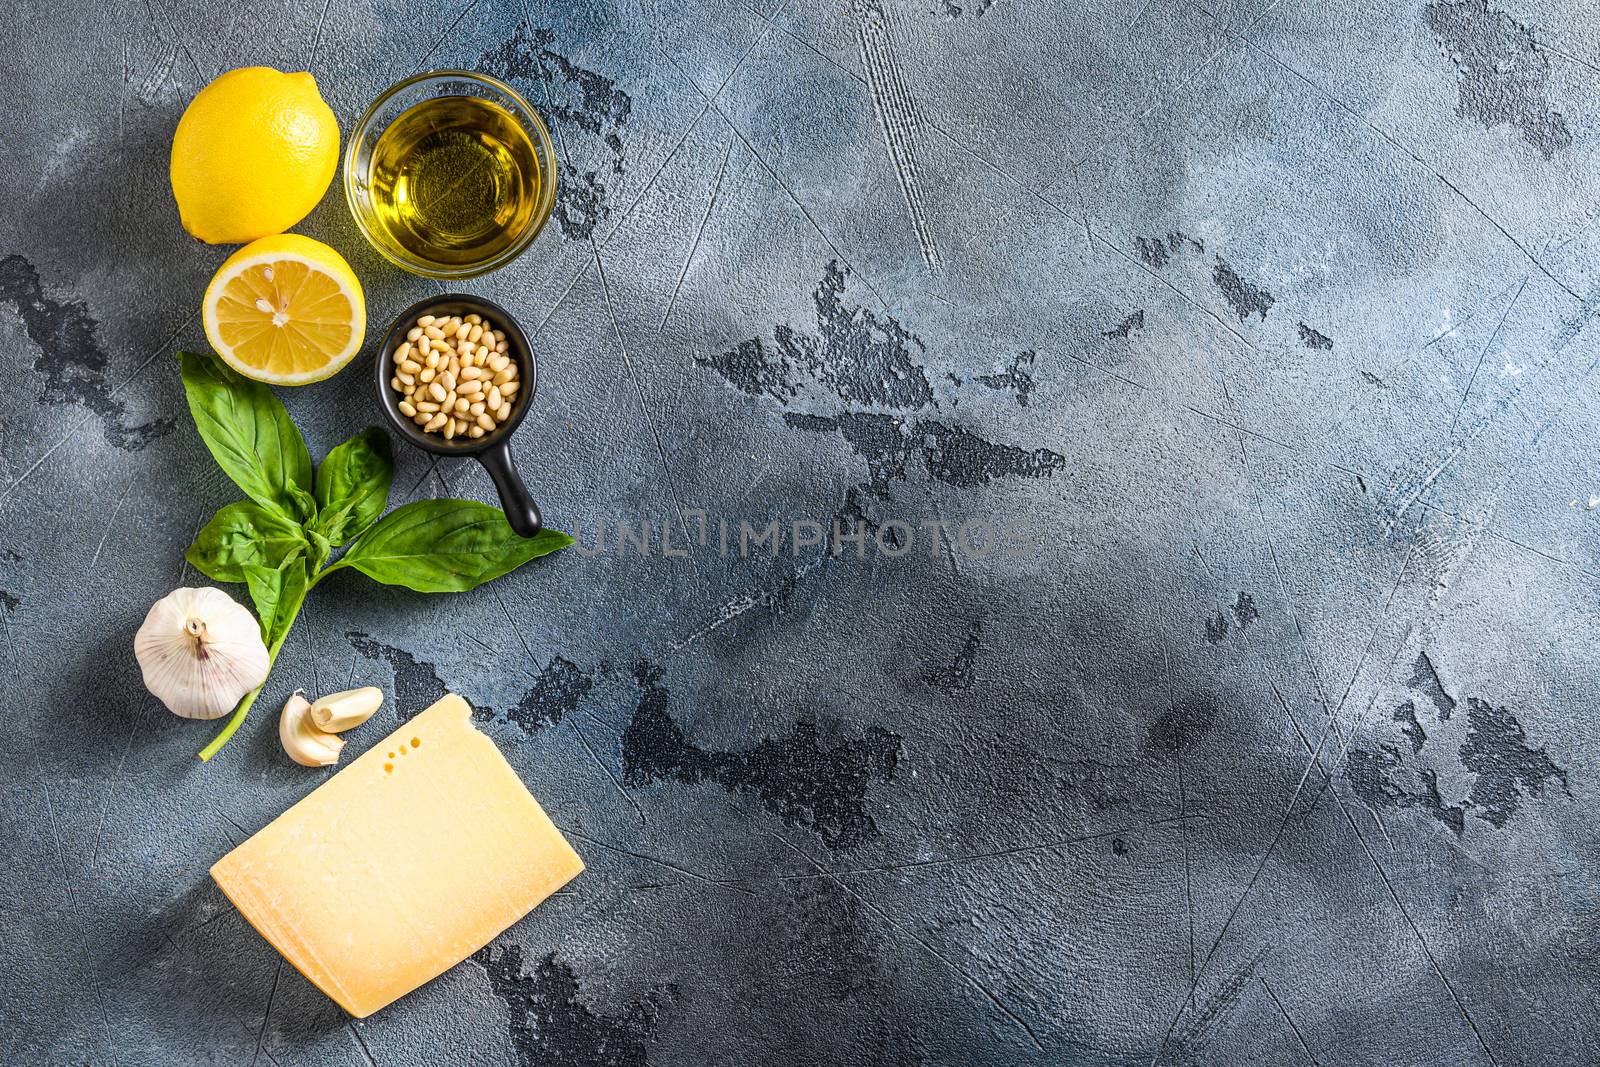 italian ingredients for pesto genovese sauce background, healthy food concept on a vintage stone grey background Basil, olive oil, parmesan, garlic, pine nuts. Top view with copy space.